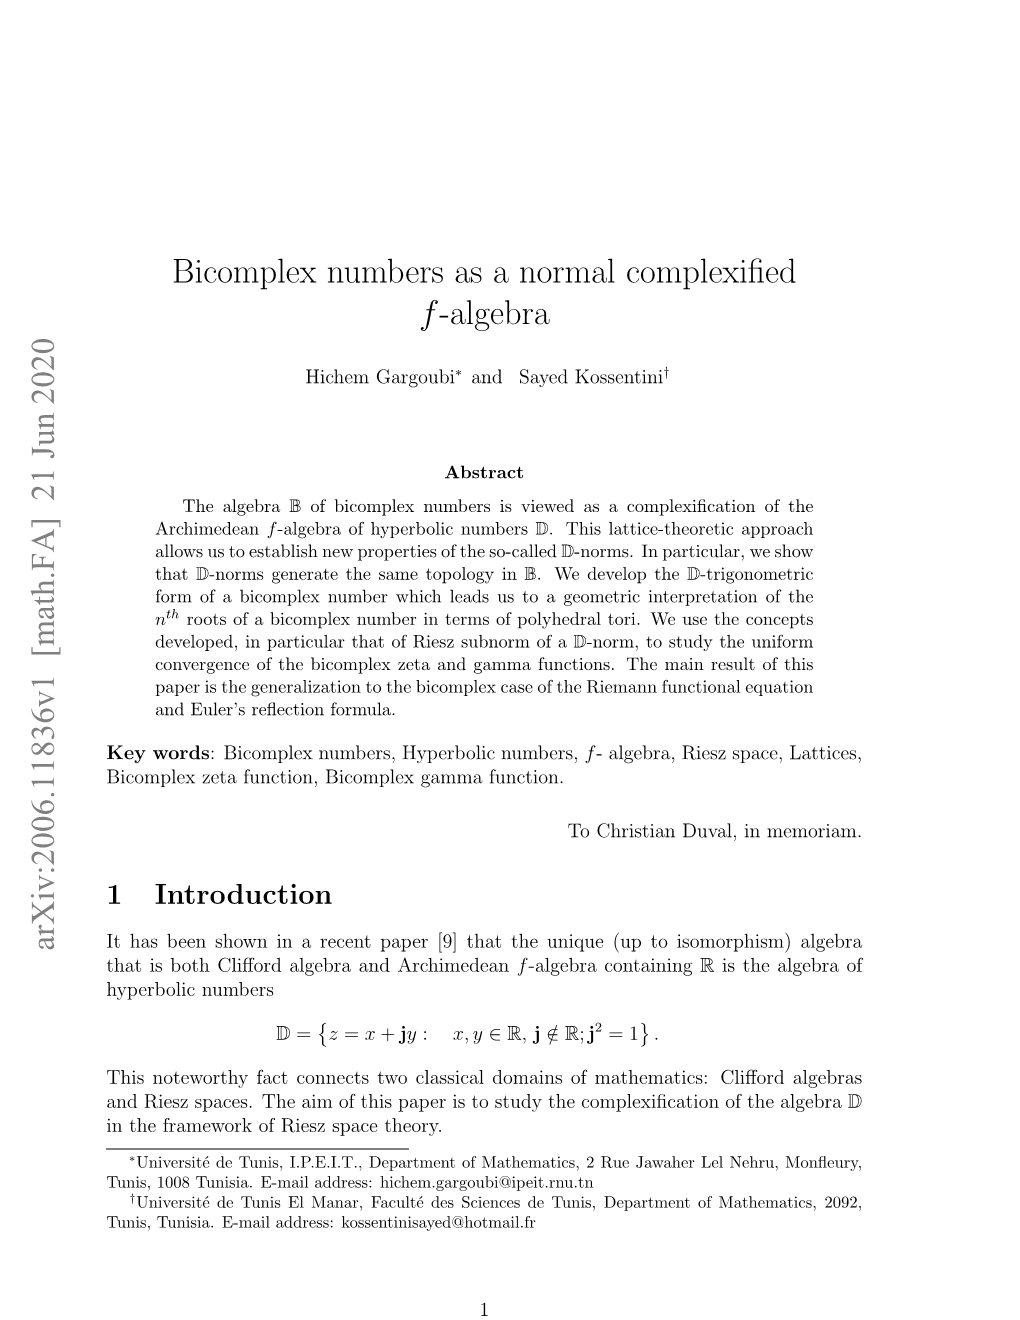 Bicomplex Numbers As a Normal Complexified F-Algebra Arxiv